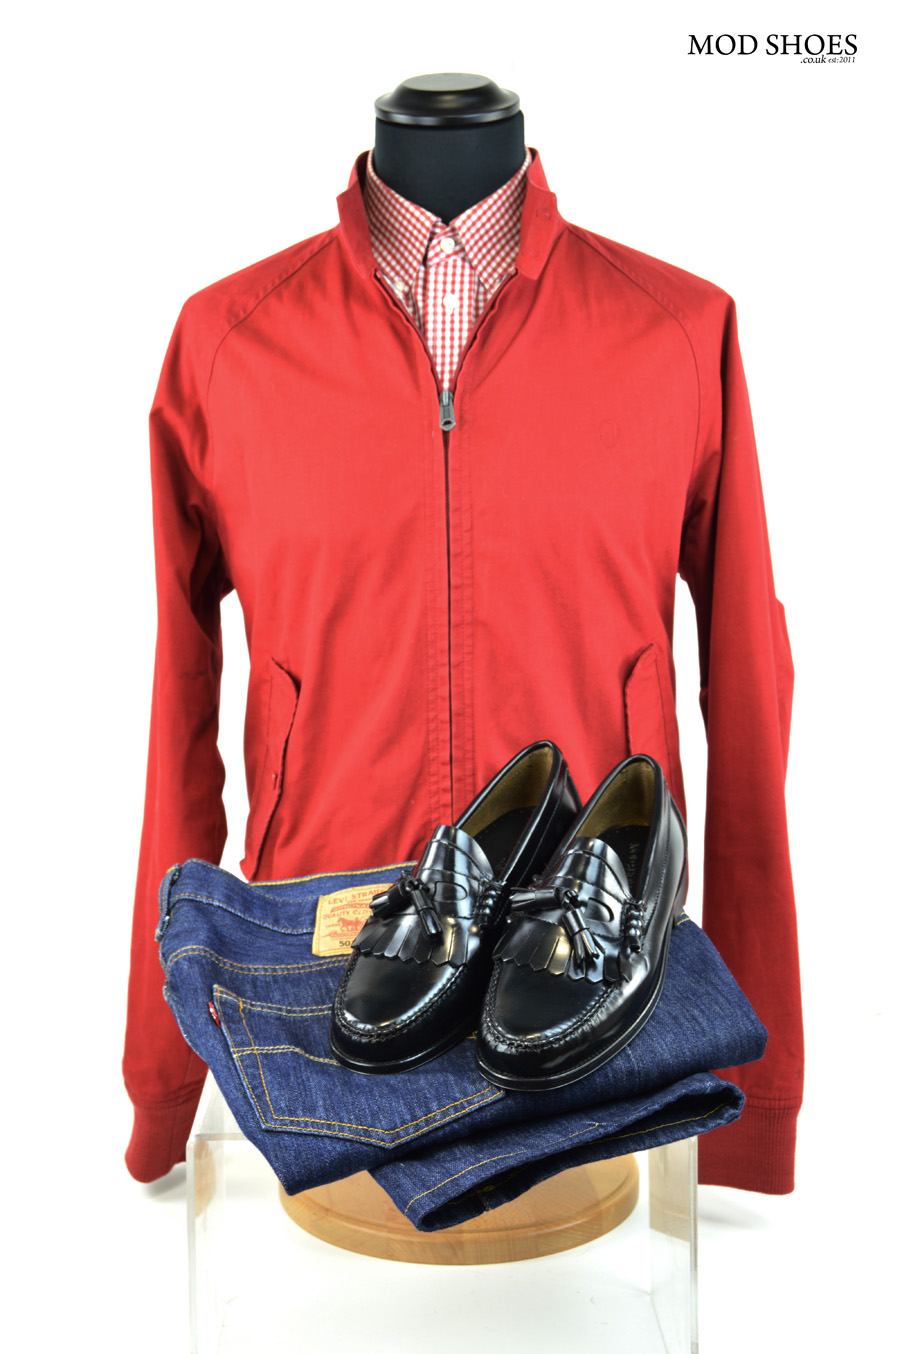 modshoes penny loafers the earls with jeans and red harrington